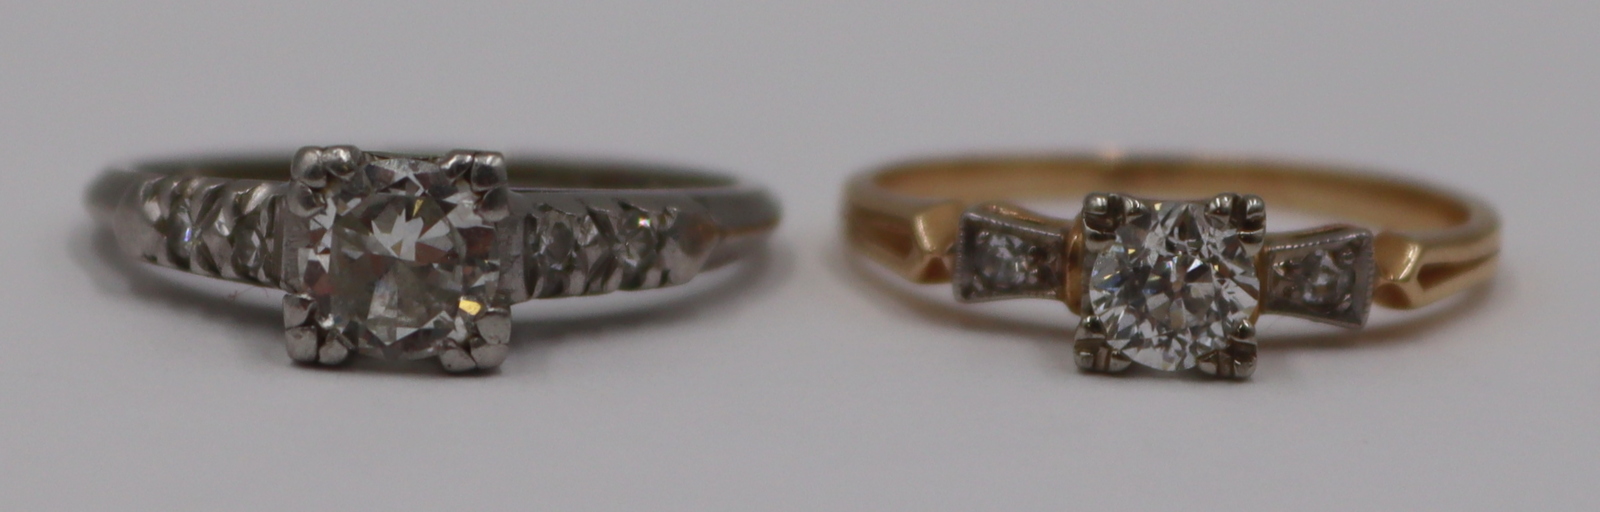 JEWELRY 2 PLATINUM AND 14KT 3bcc28